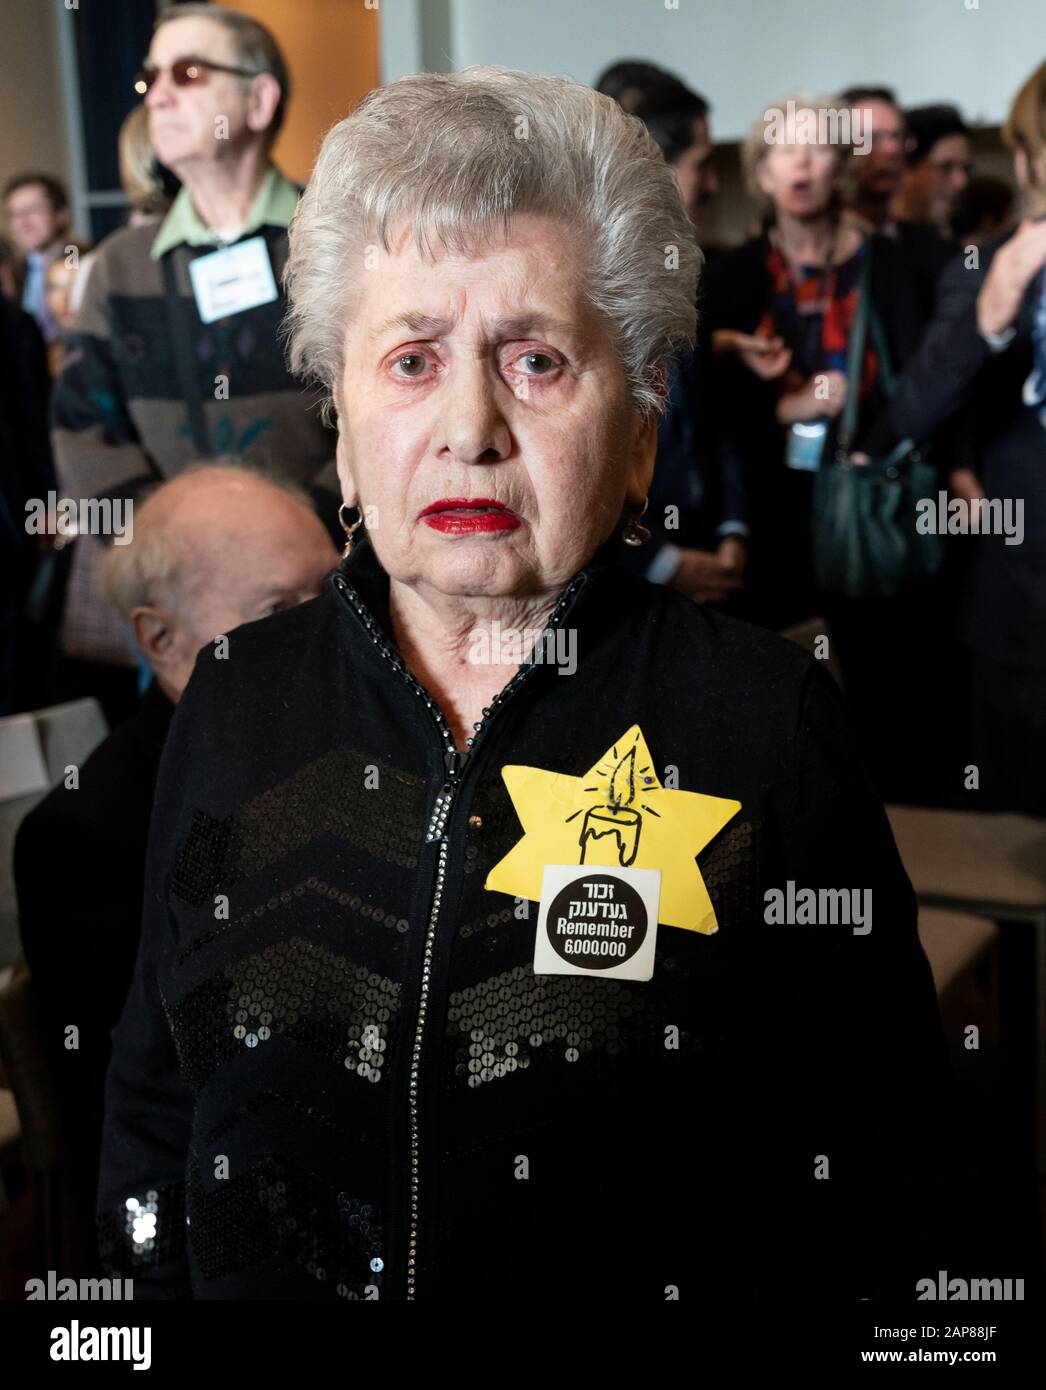 New York, NY - January 21, 2020: Holocaust Fira Stukelman attends Opening of exhibition commemorating 75th anniversary of liberation of Auschwitz-Birkenau concentration camp at UN Headquarters Stock Photo